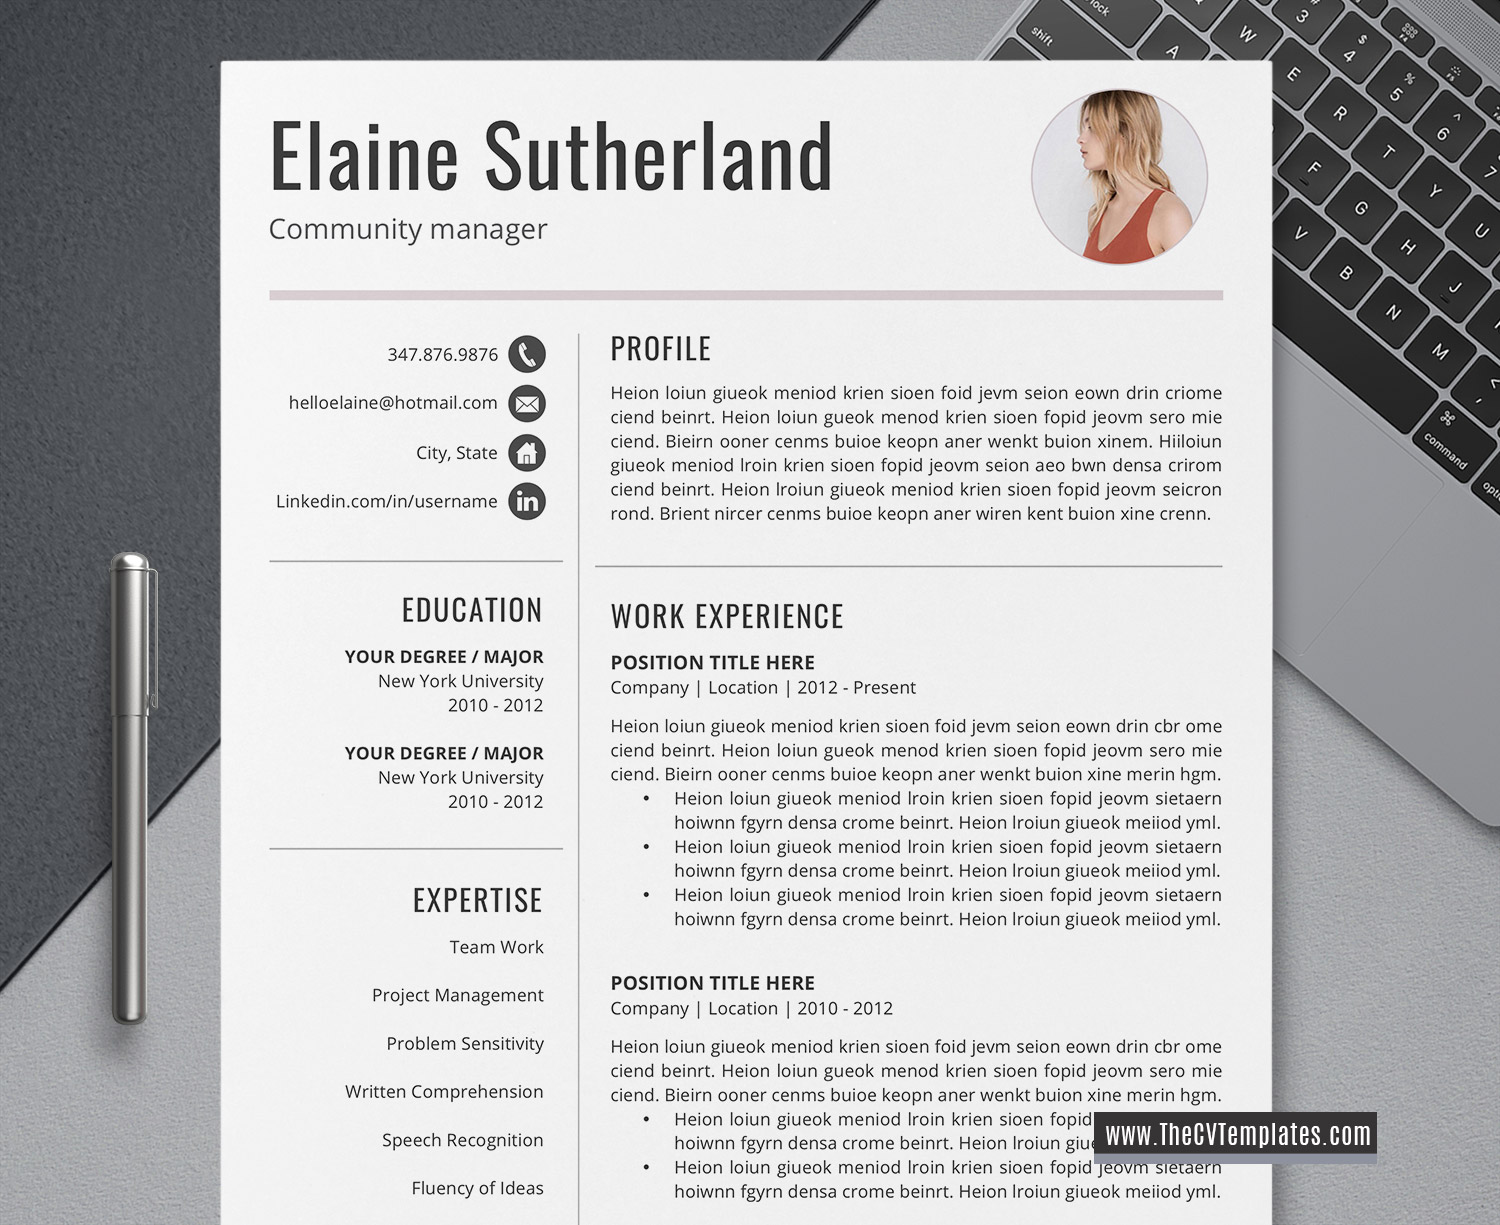 Resume Cv Template from www.thecvtemplates.com